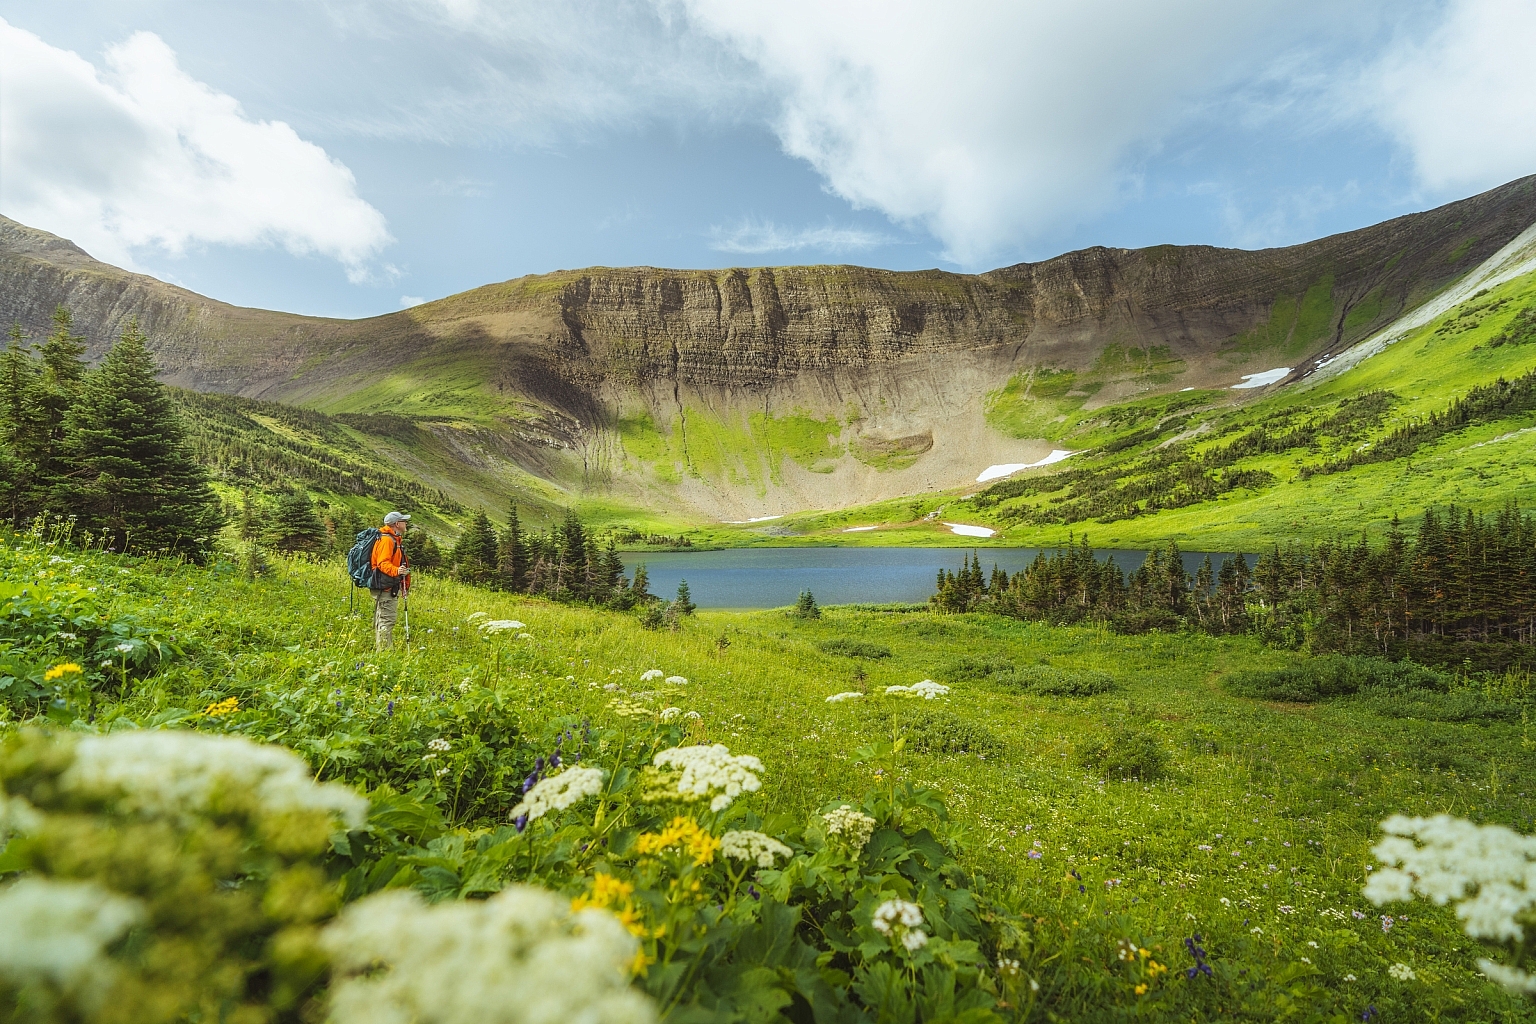 A hiker in the foreground walks past a lake with a mountain ridge behind.